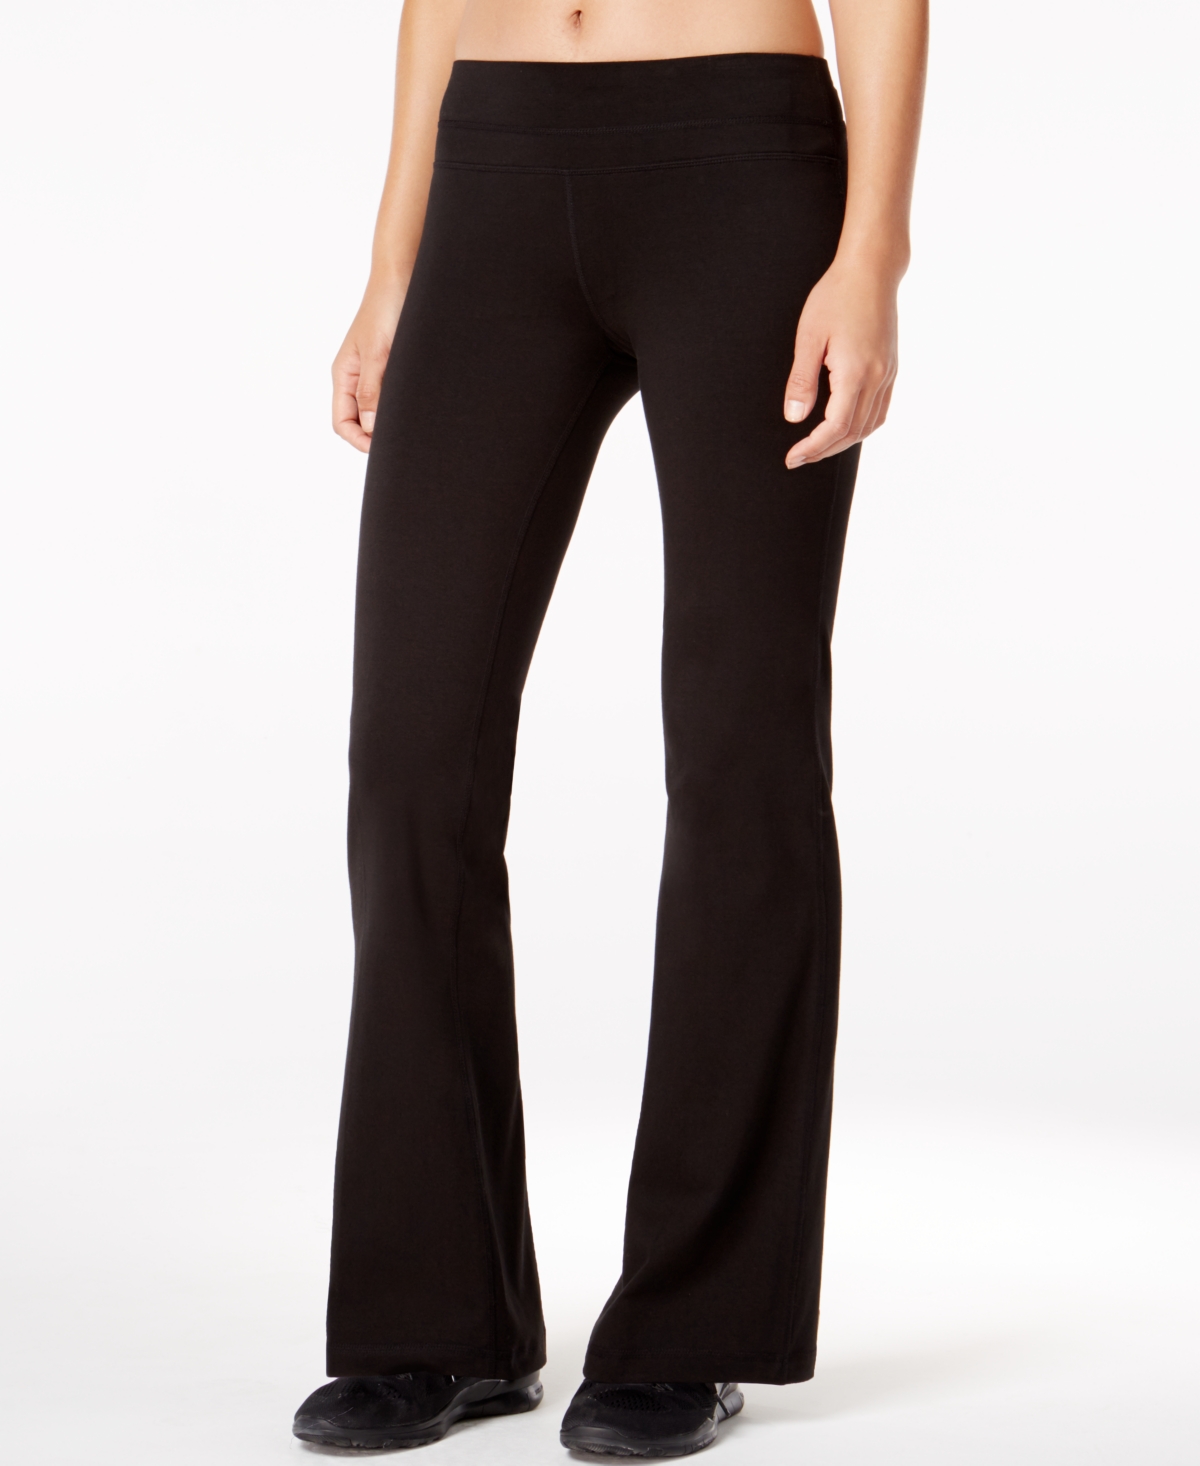 Women's Essentials Flex Stretch Bootcut Yoga Pants with Short Inseam, Created for Macy's - Black